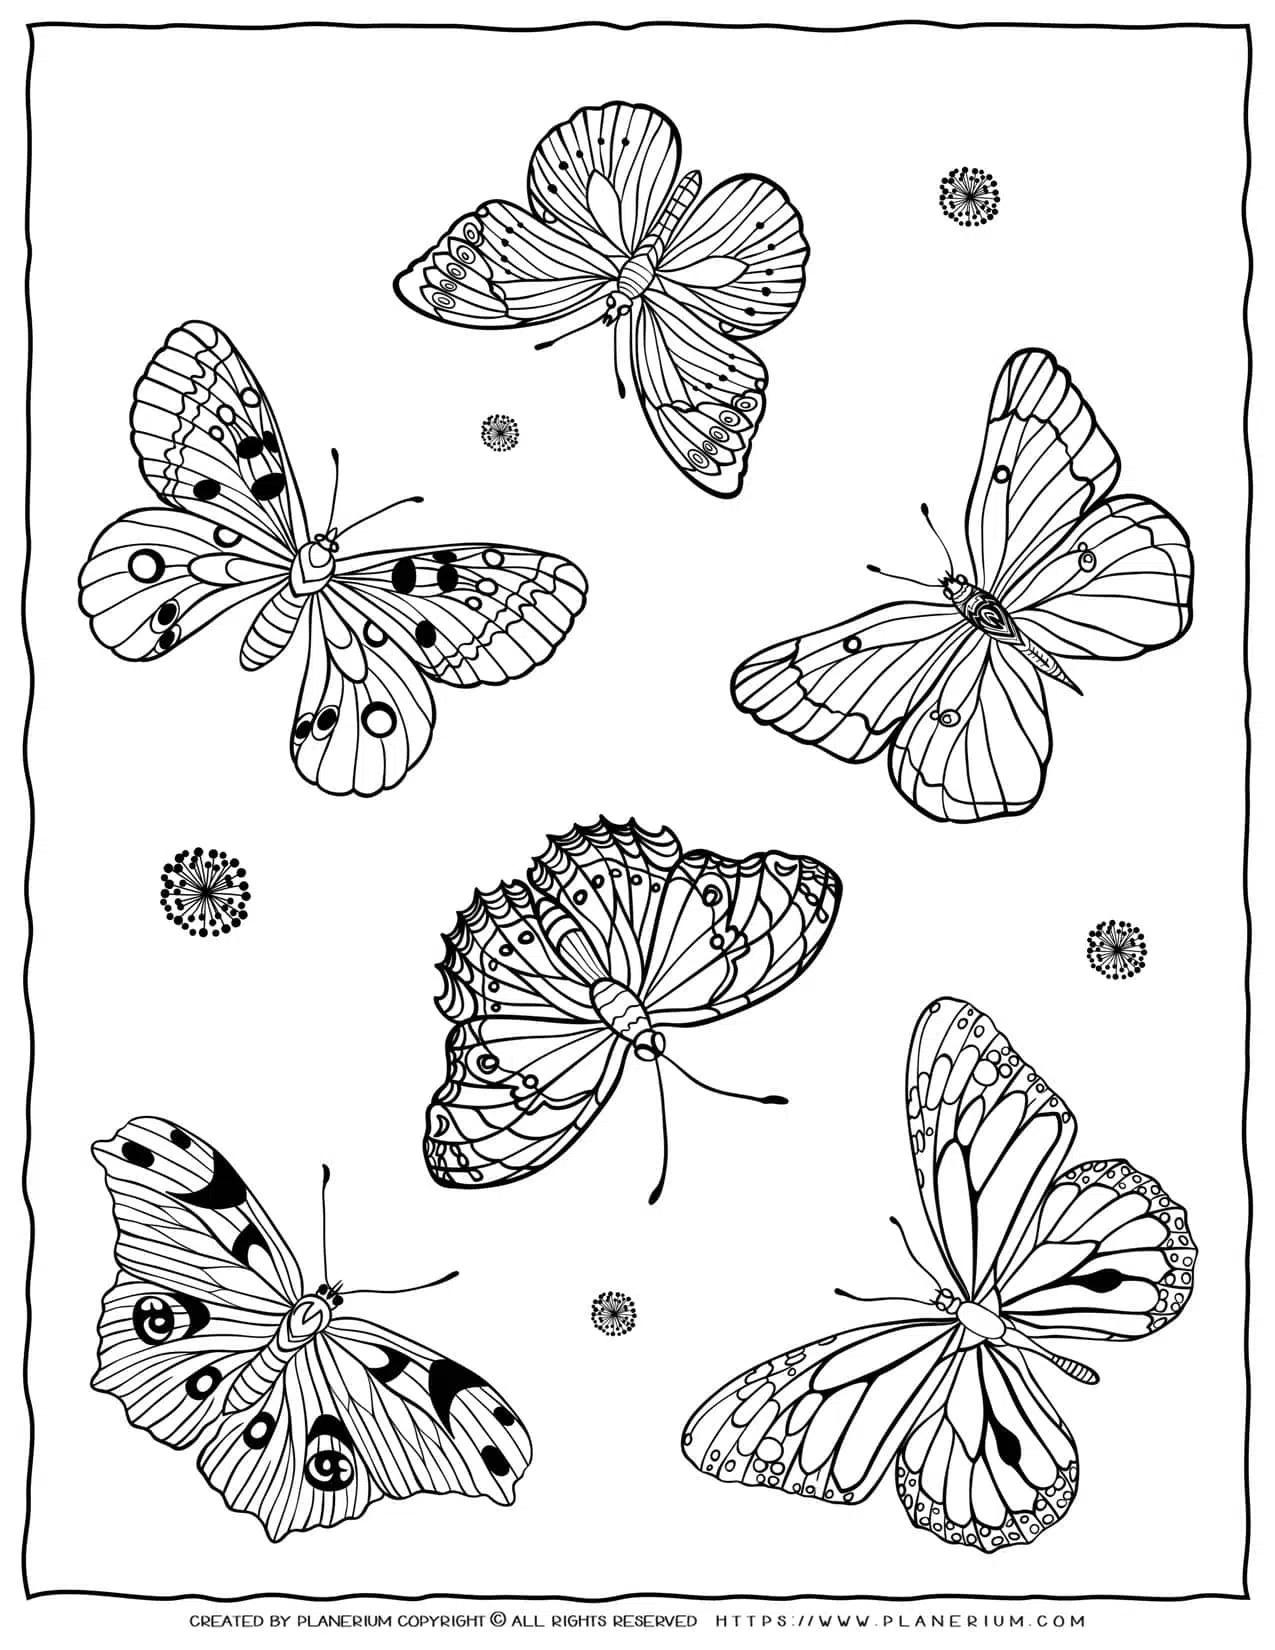 adult coloring pages butterfly